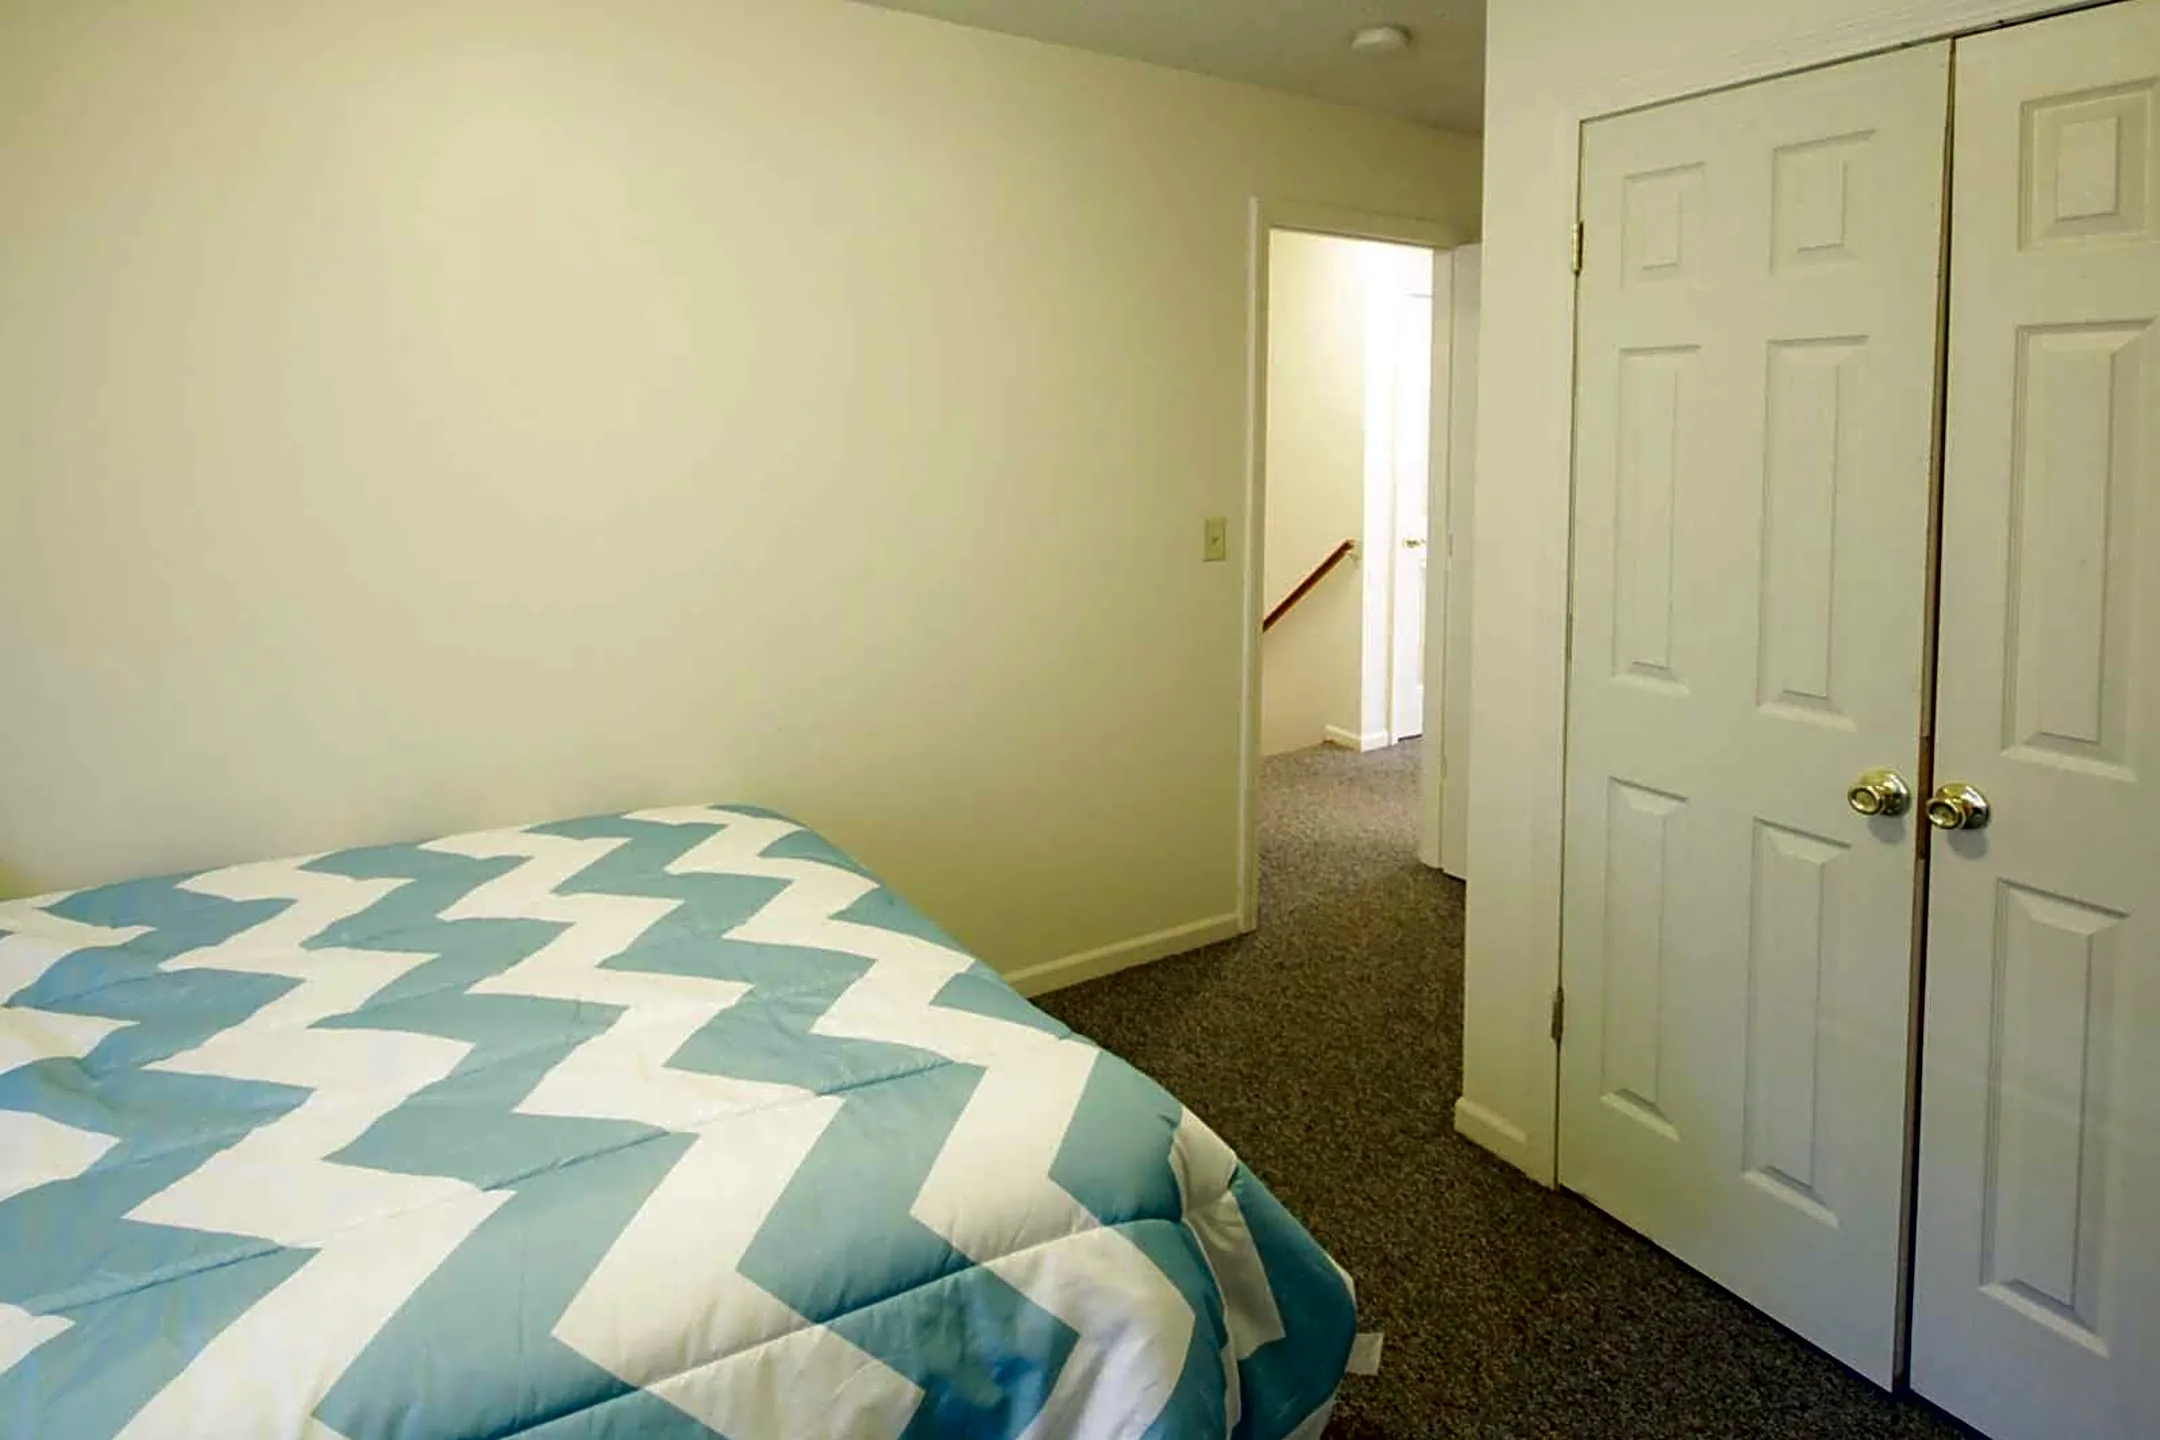 Bedroom - Eddy Street Student Townhomes - South Bend, IN